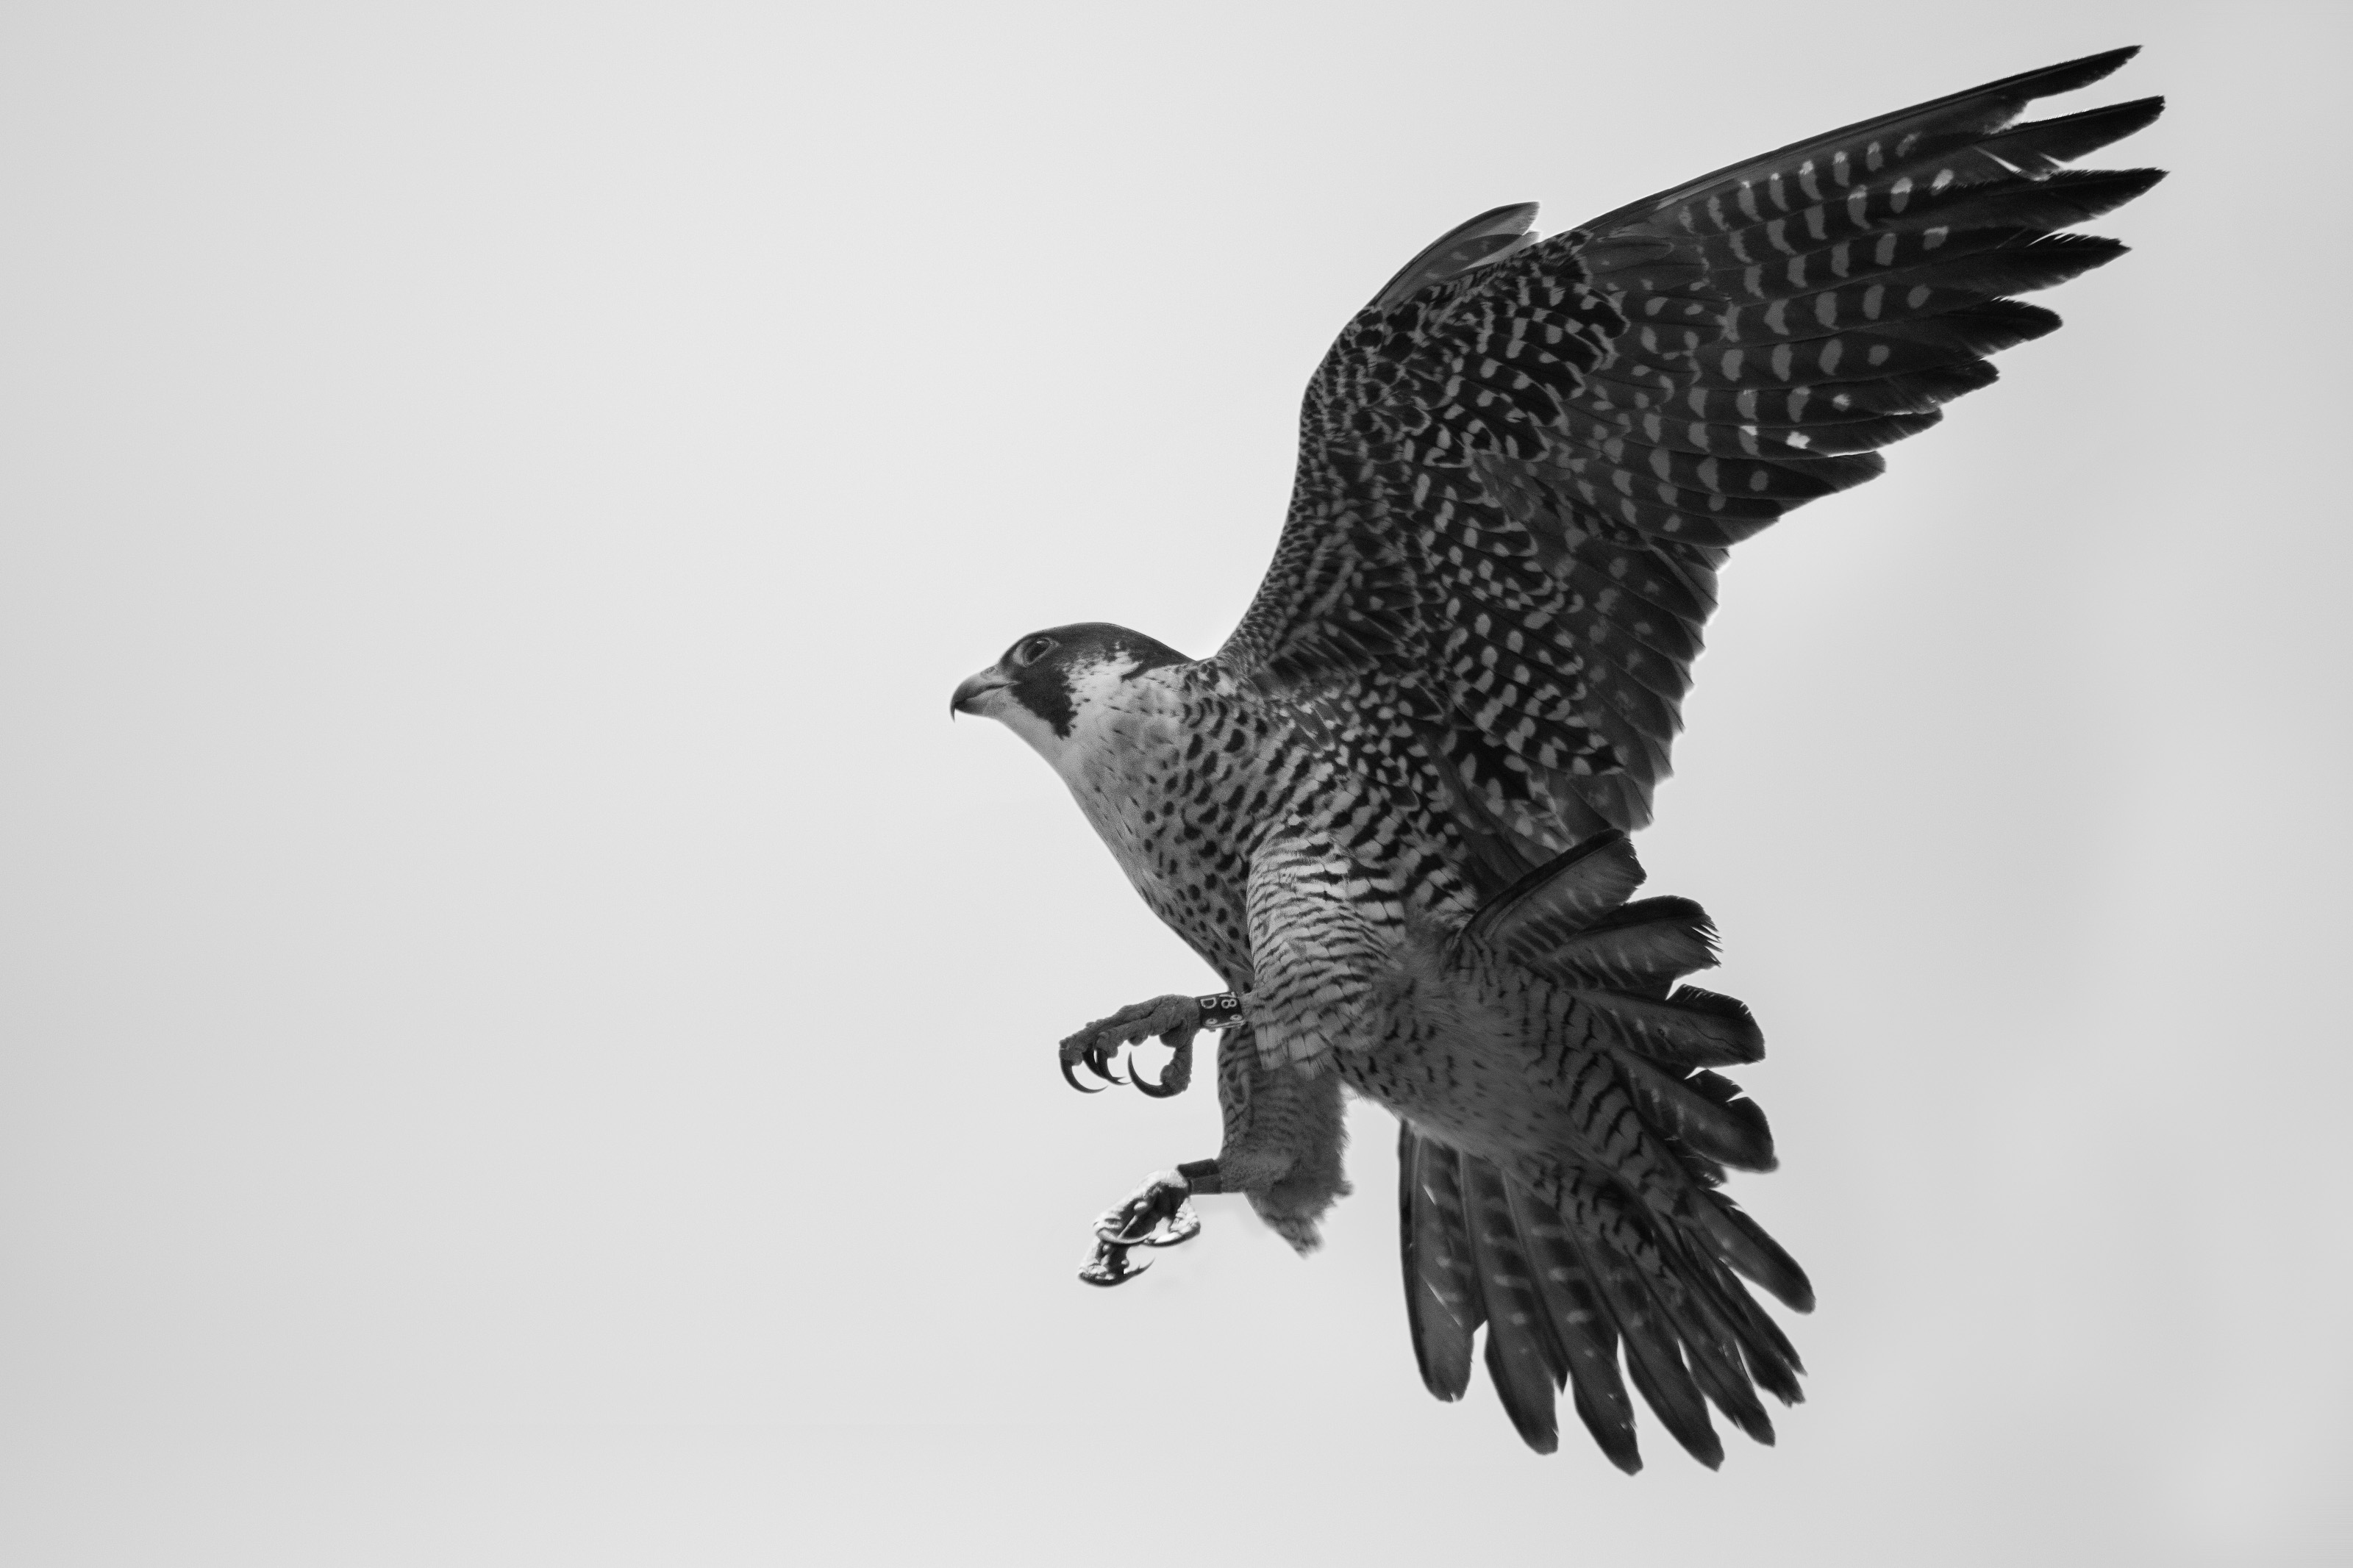 Peregrine Falcon (Falco peregrinus) at flight in Heredia, Costa Rica(Notice the banding on the legs)